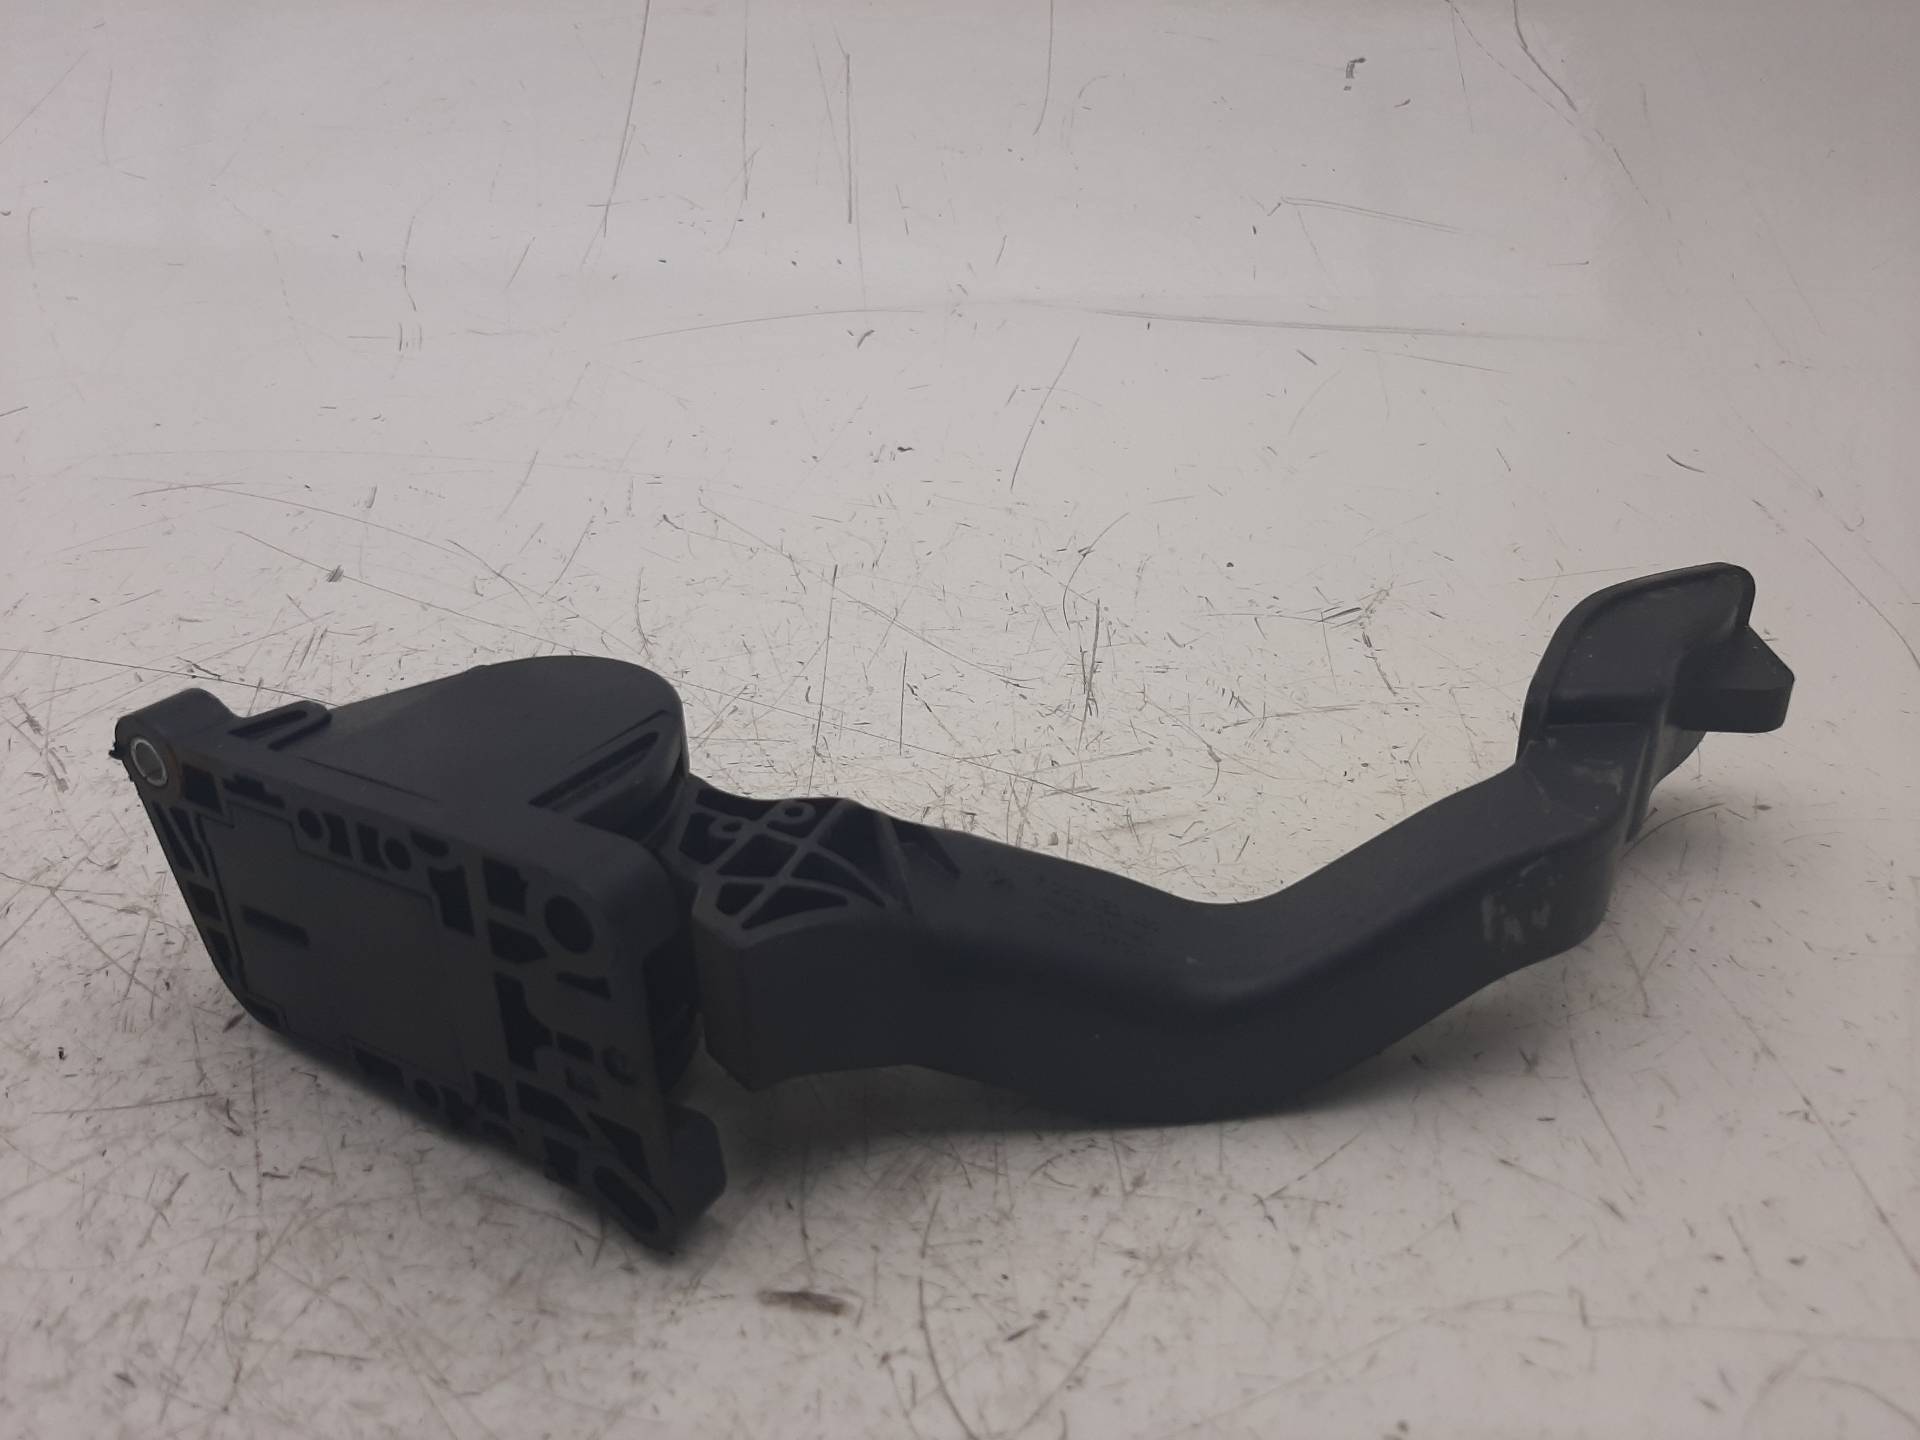 PEUGEOT 207 1 generation (2006-2009) Other Body Parts 9671433680, 0280755174 18582557